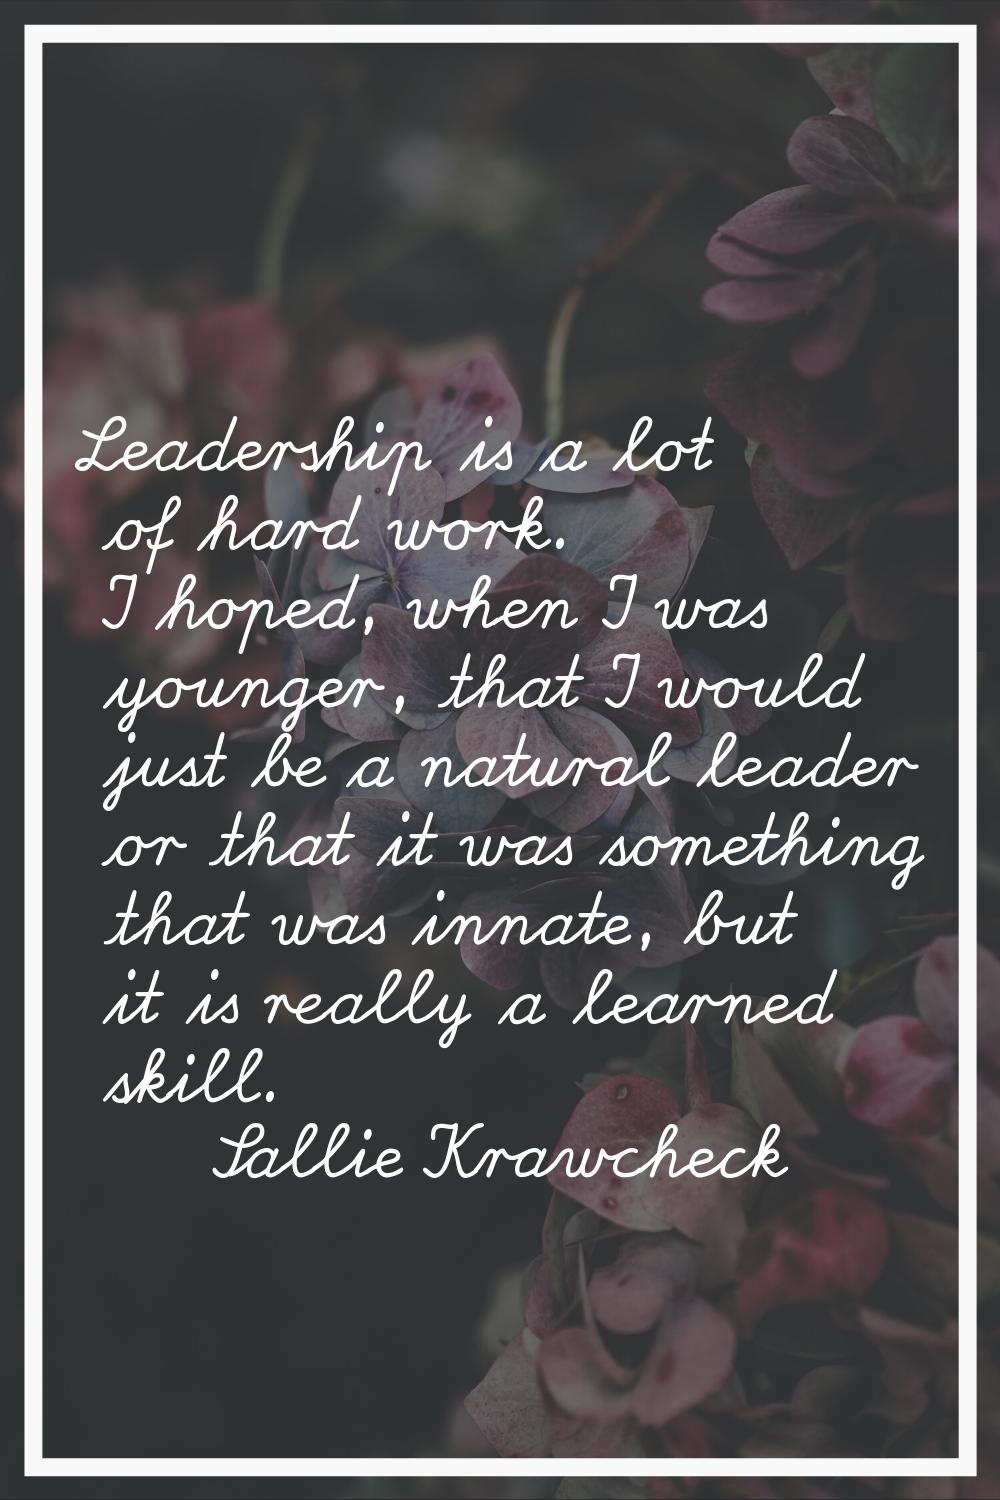 Leadership is a lot of hard work. I hoped, when I was younger, that I would just be a natural leade